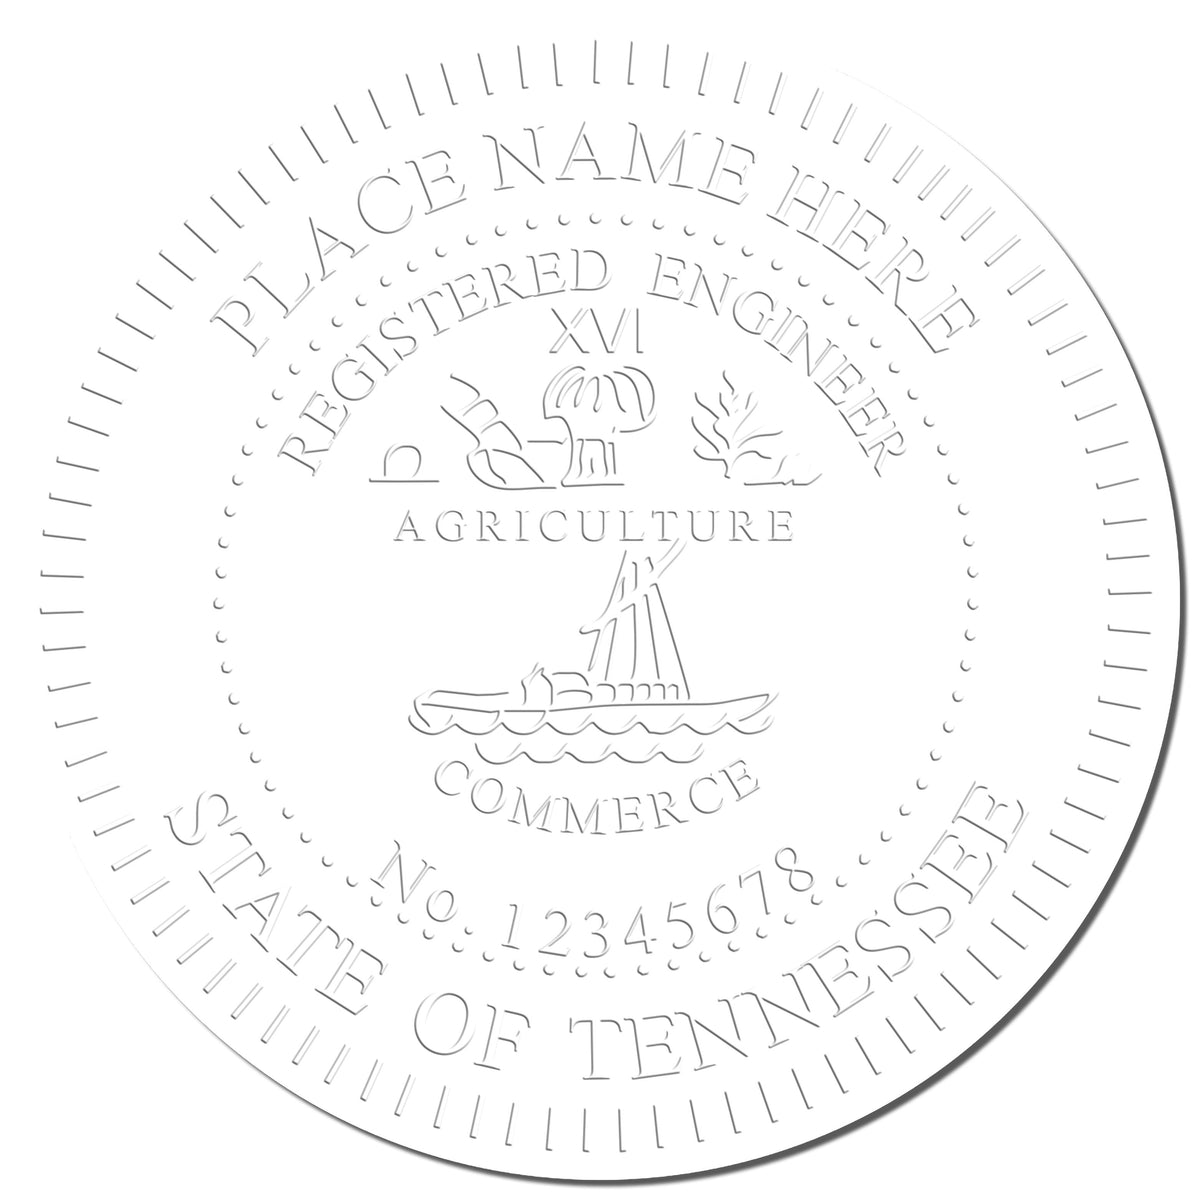 This paper is stamped with a sample imprint of the Hybrid Tennessee Engineer Seal, signifying its quality and reliability.